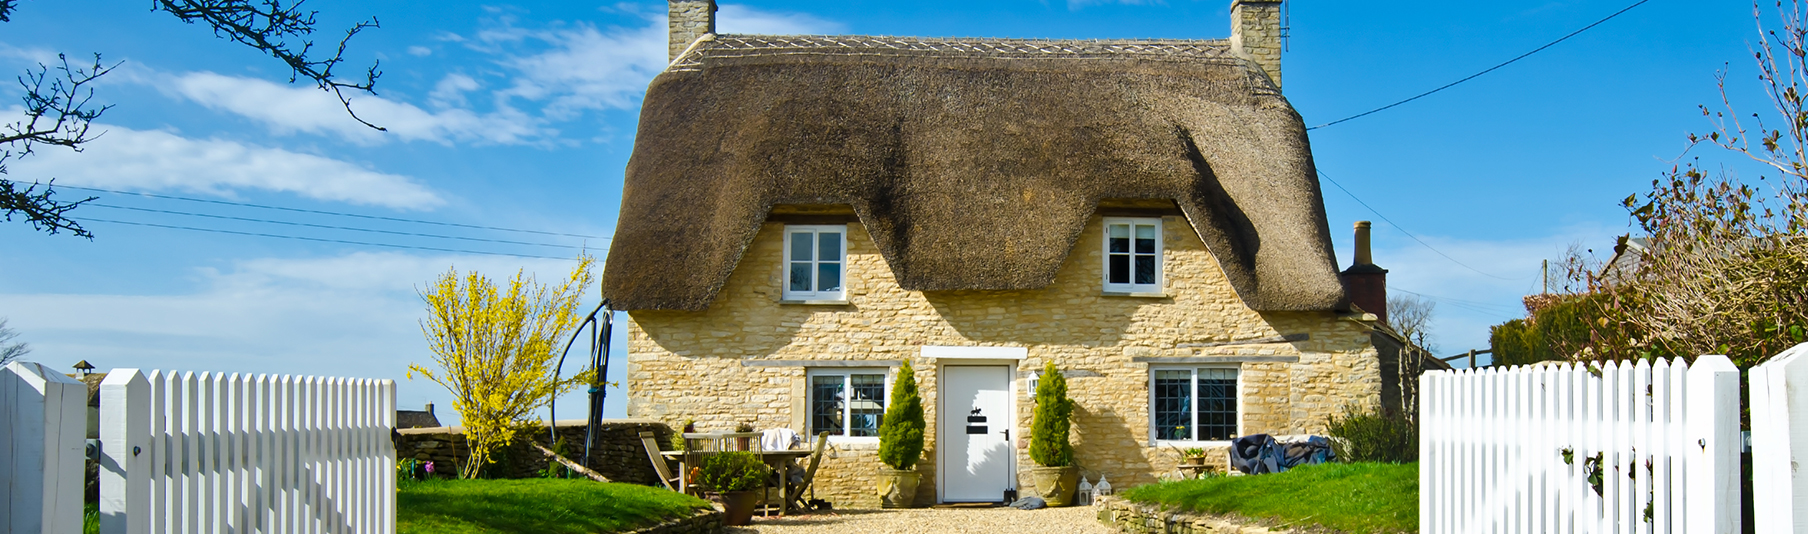 Household Insurance: A charming yellow cottage located in the countryside